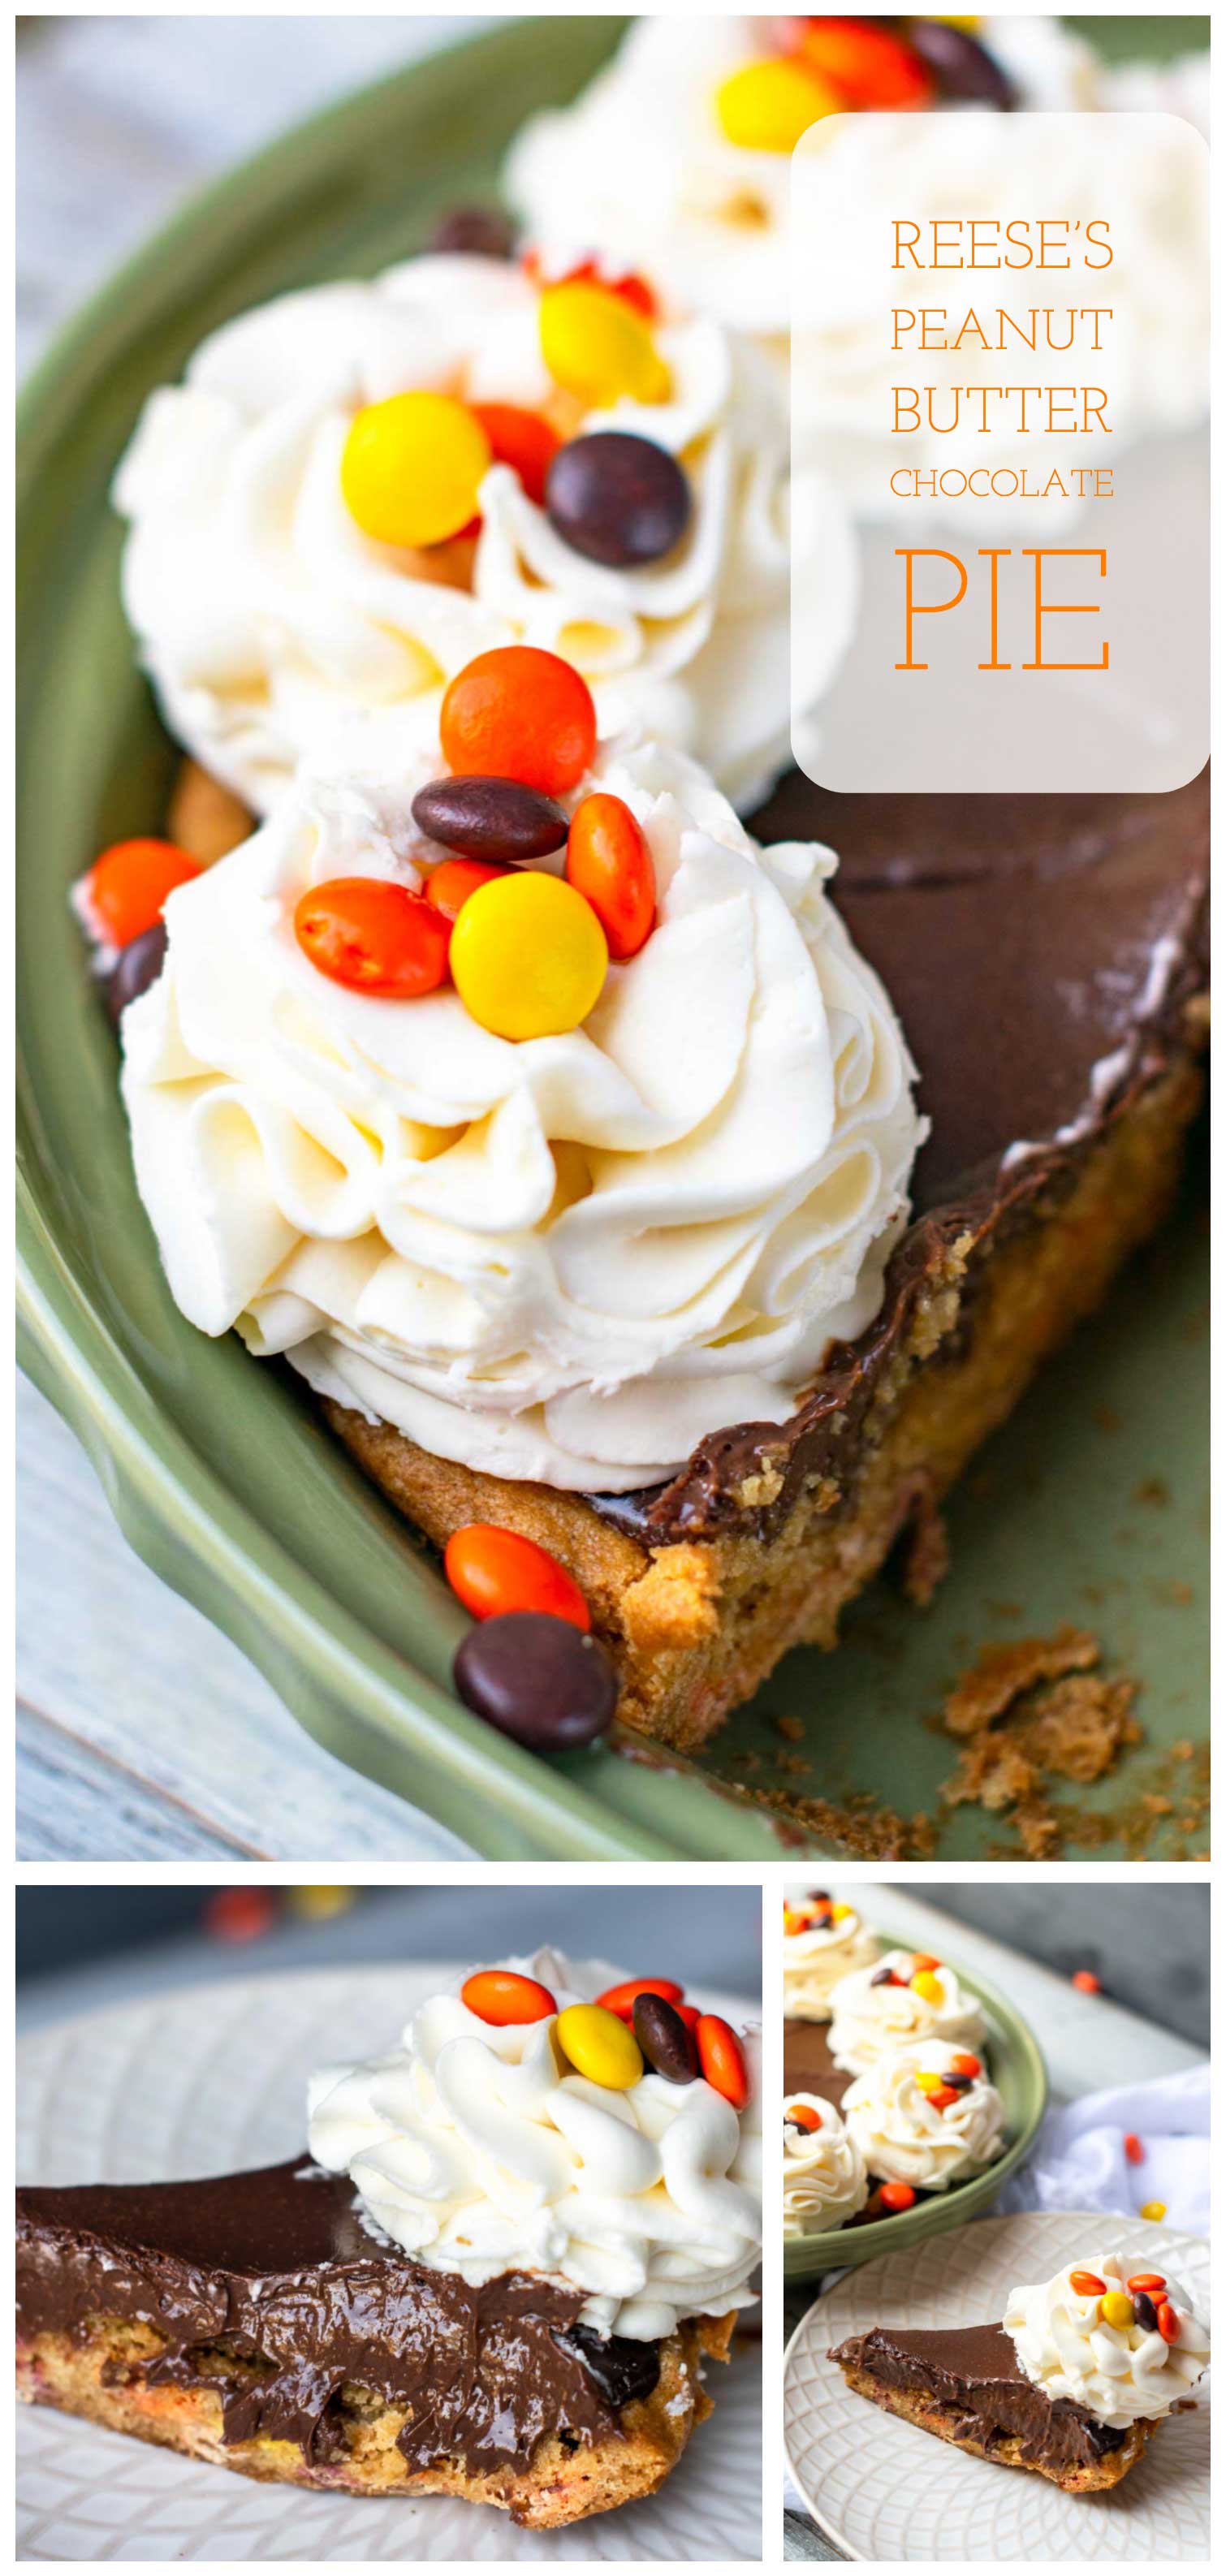 This refrigerated pie features a peanut butter cookie crust and rich chocolate ganache topped with Reese's pieces!